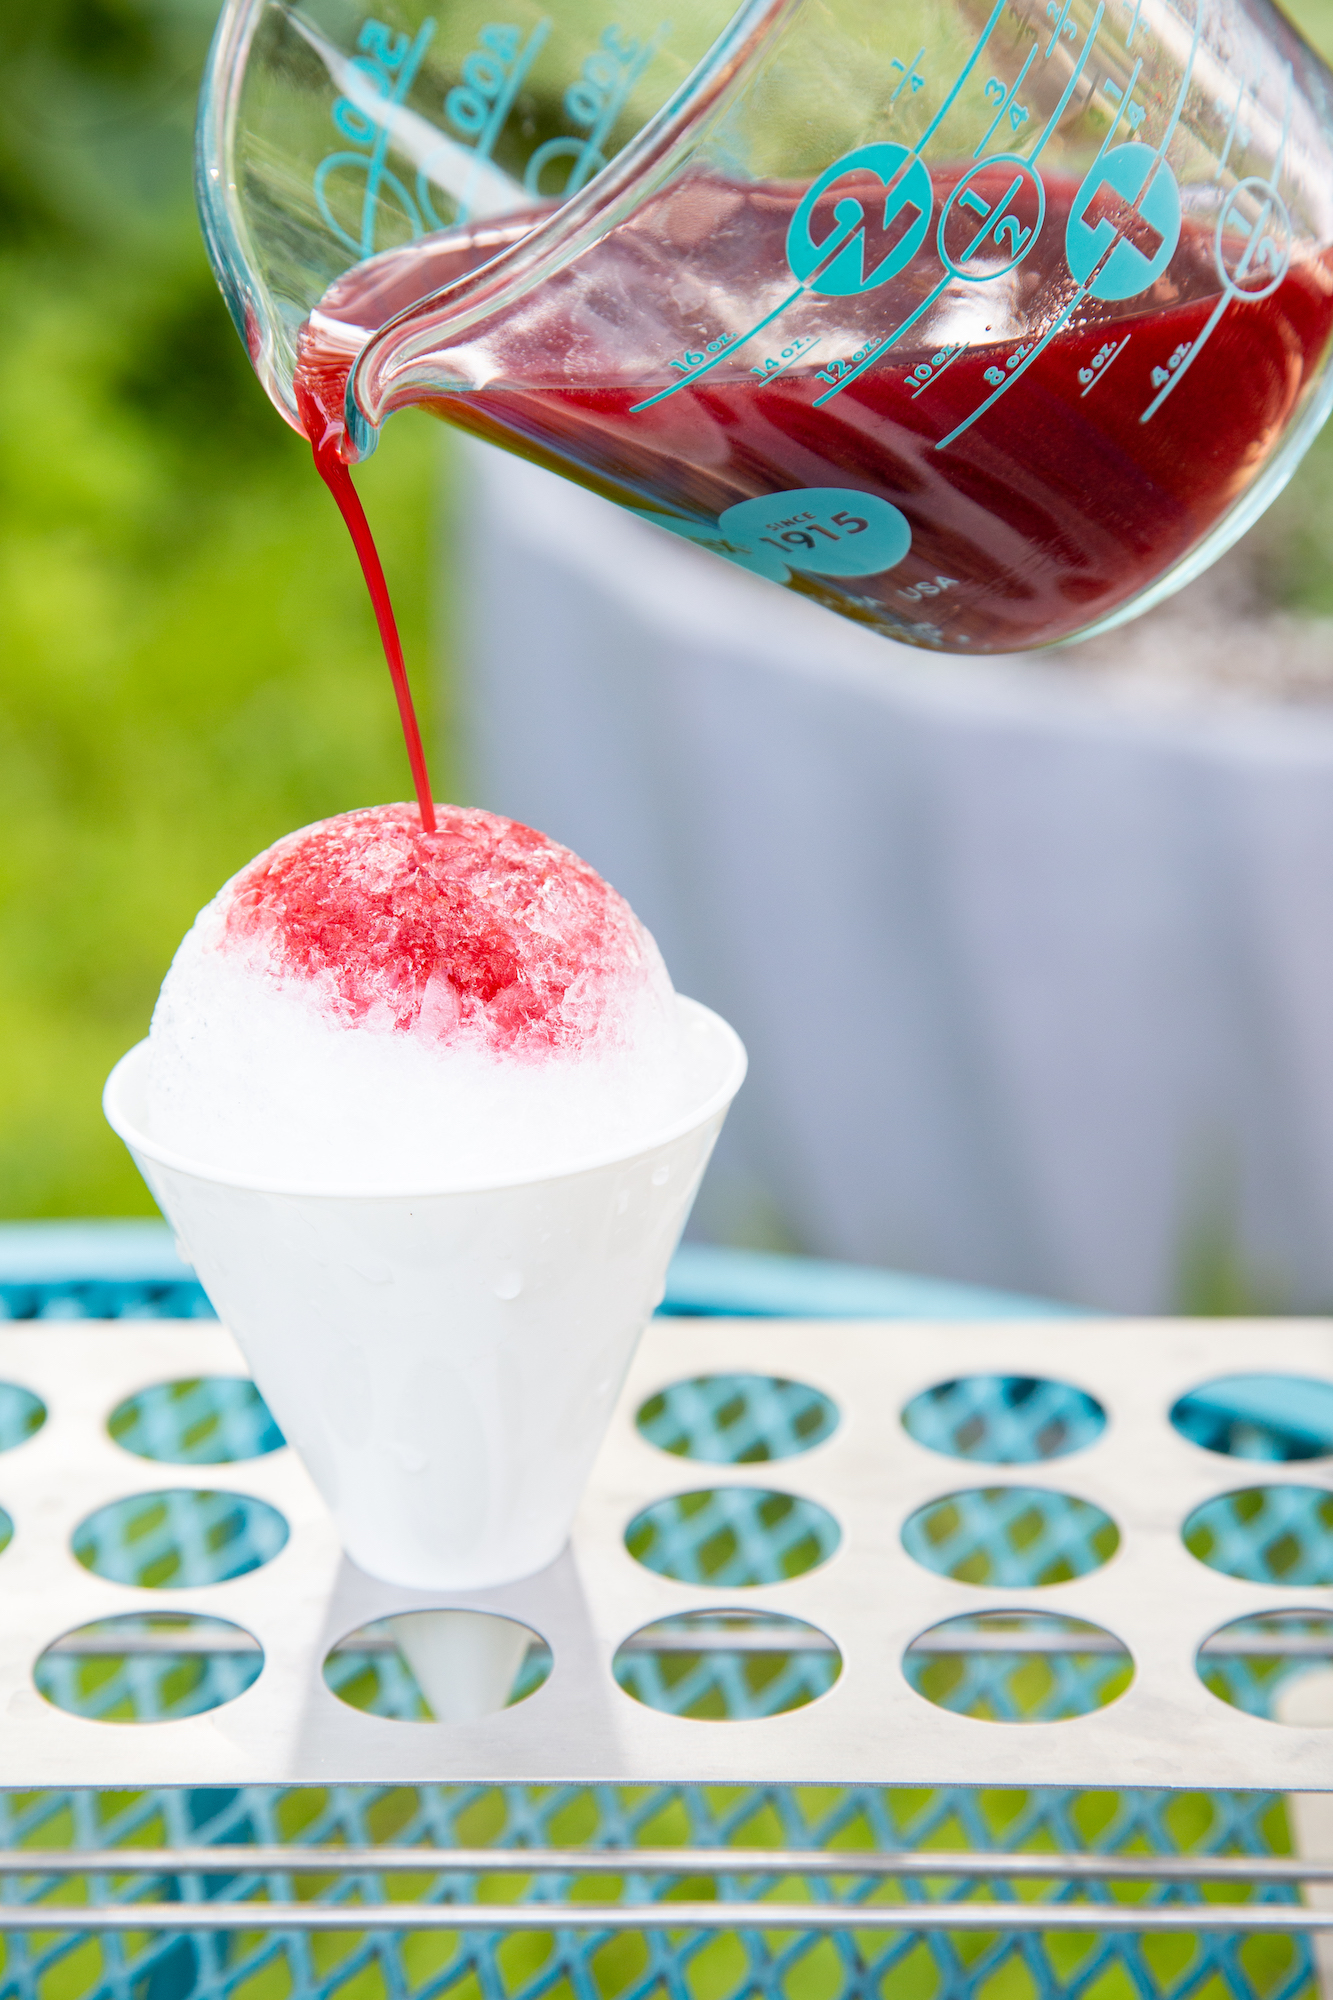 pouring cherry syrup on a sno cone